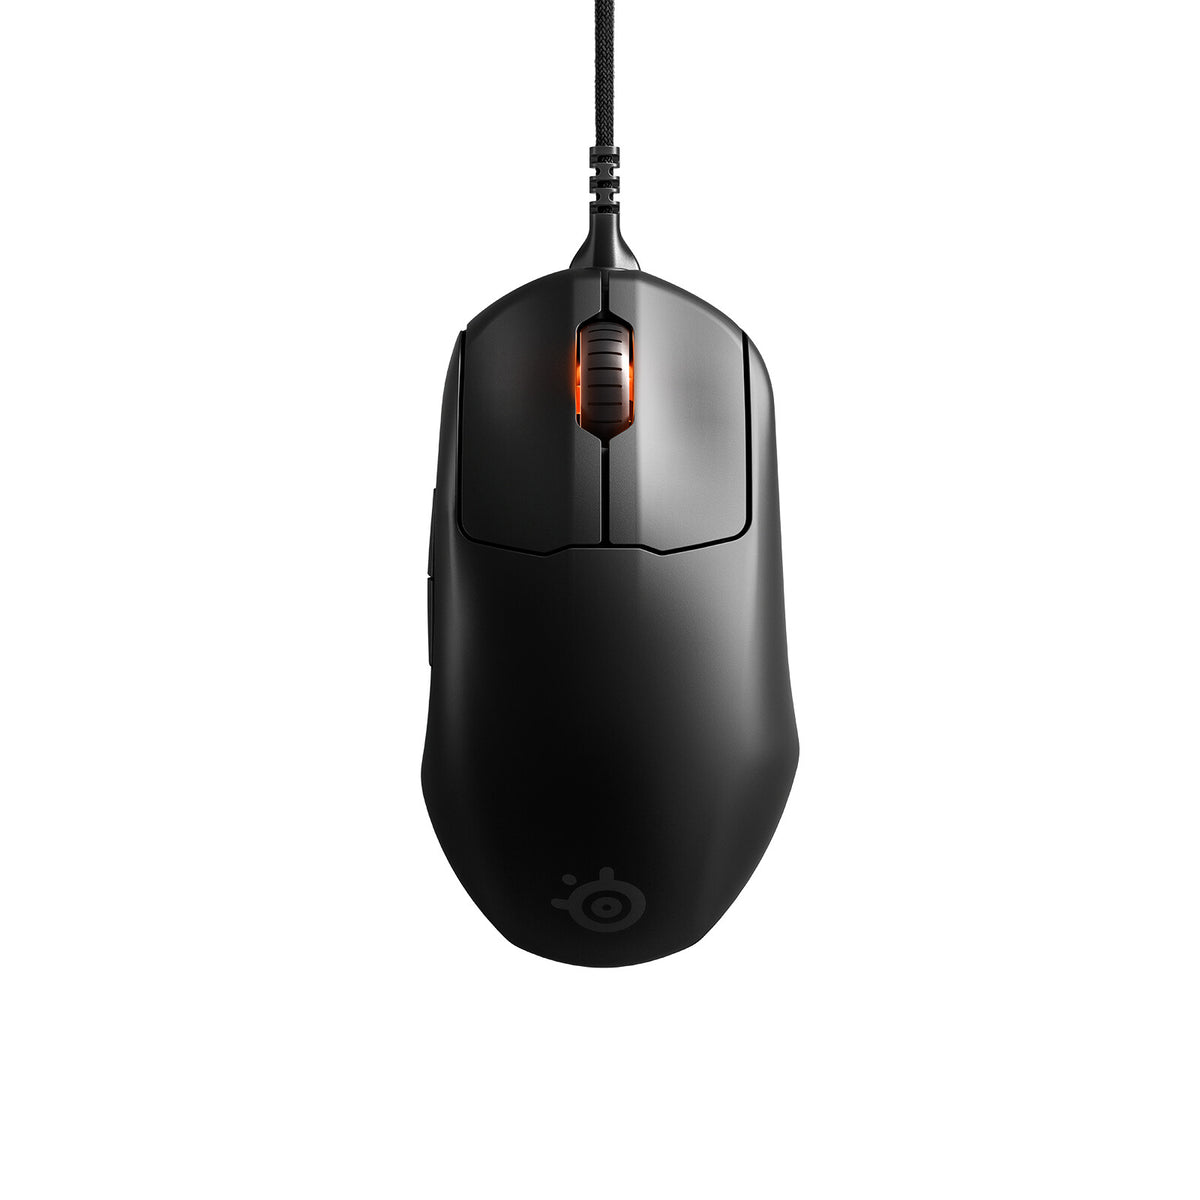 Steelseries Prime - Wired USB Type-A Optical Mouse - 18,000 DPI